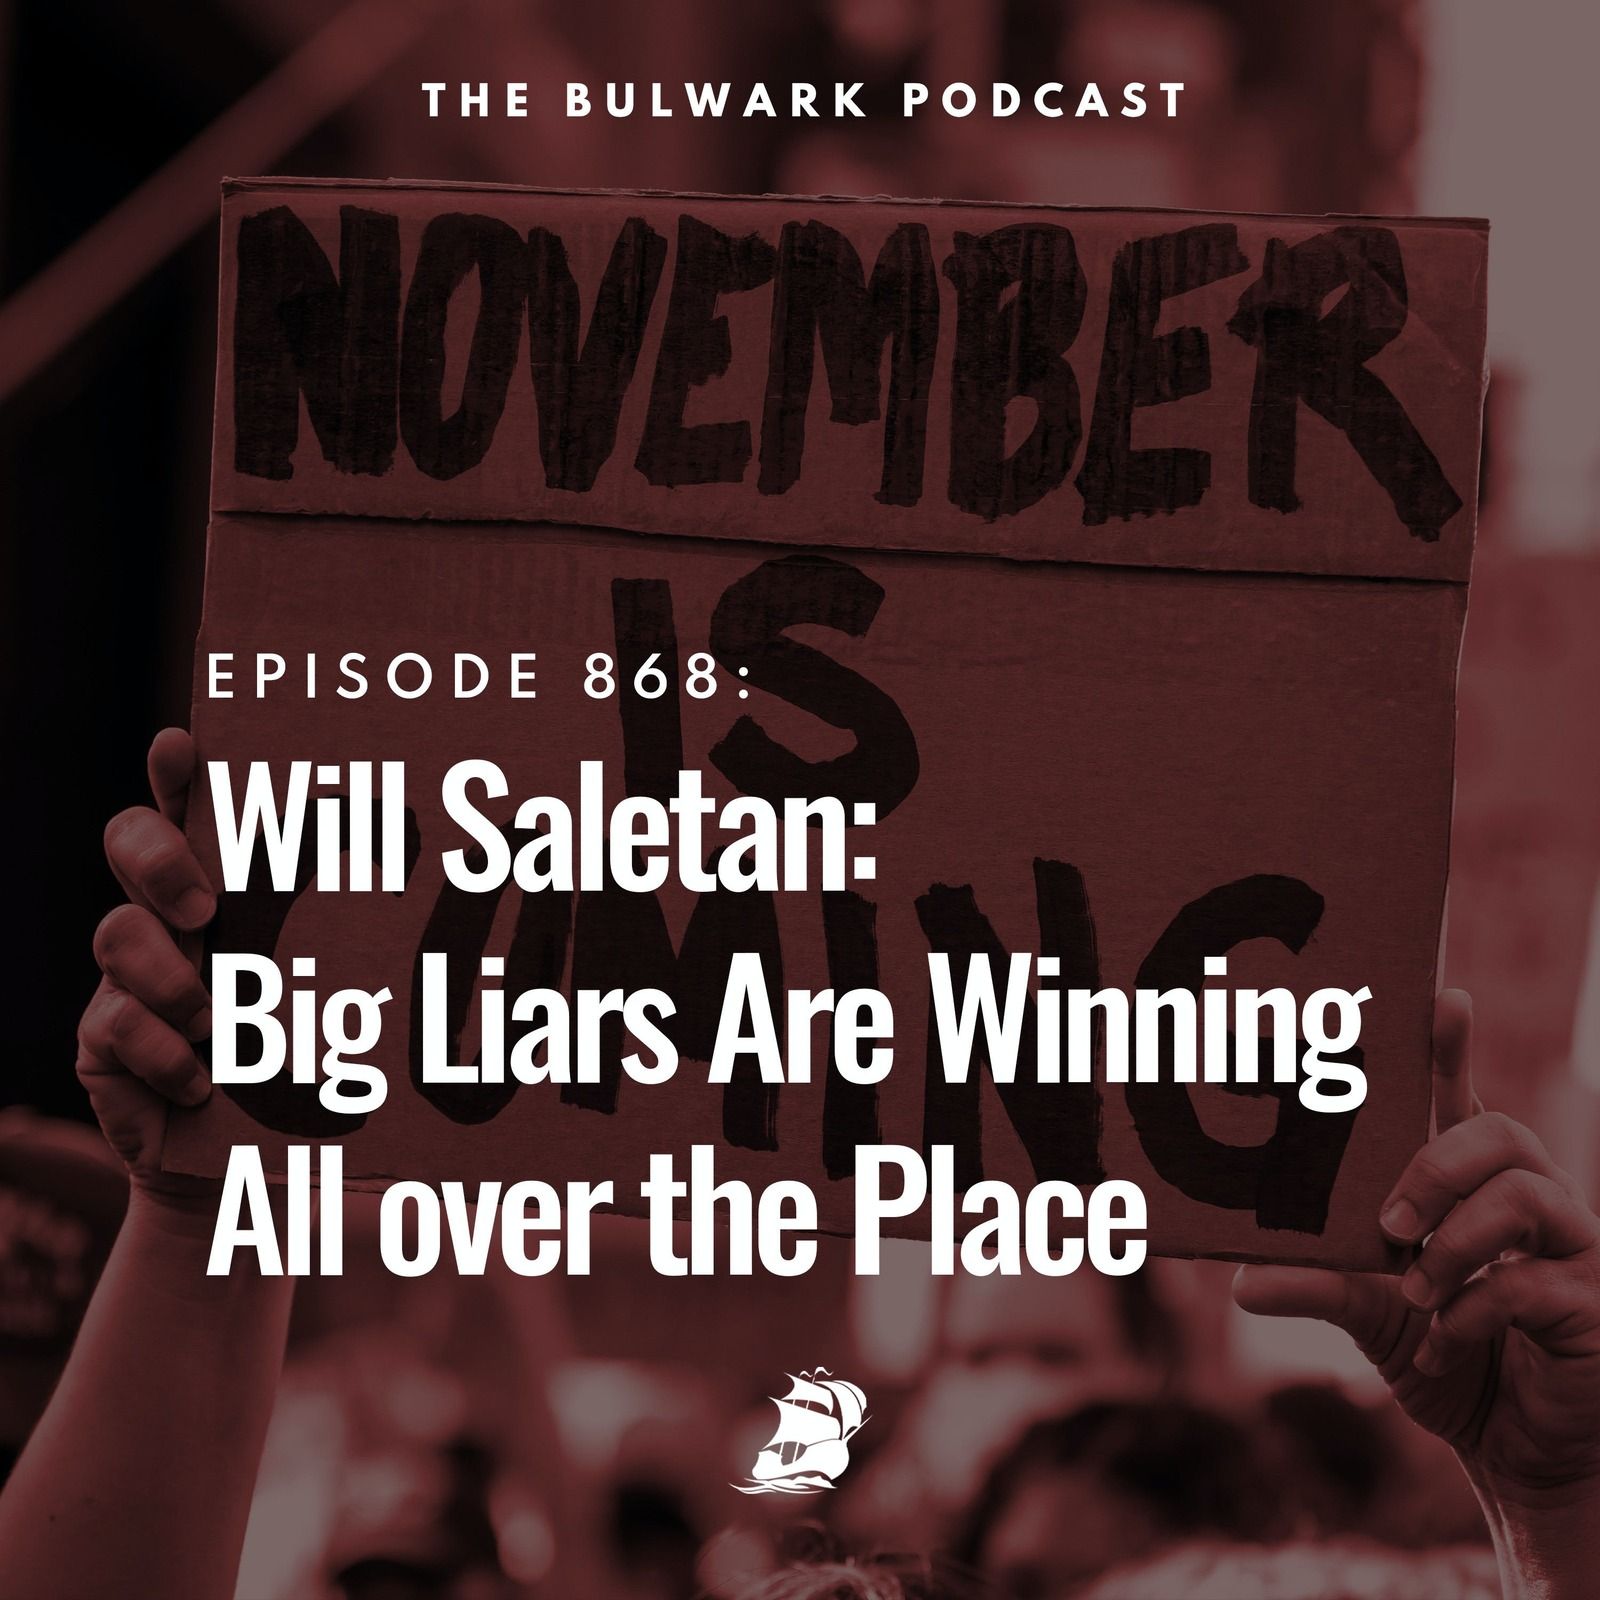 Will Saletan: Big Liars Are Winning All over the Place by The Bulwark Podcast